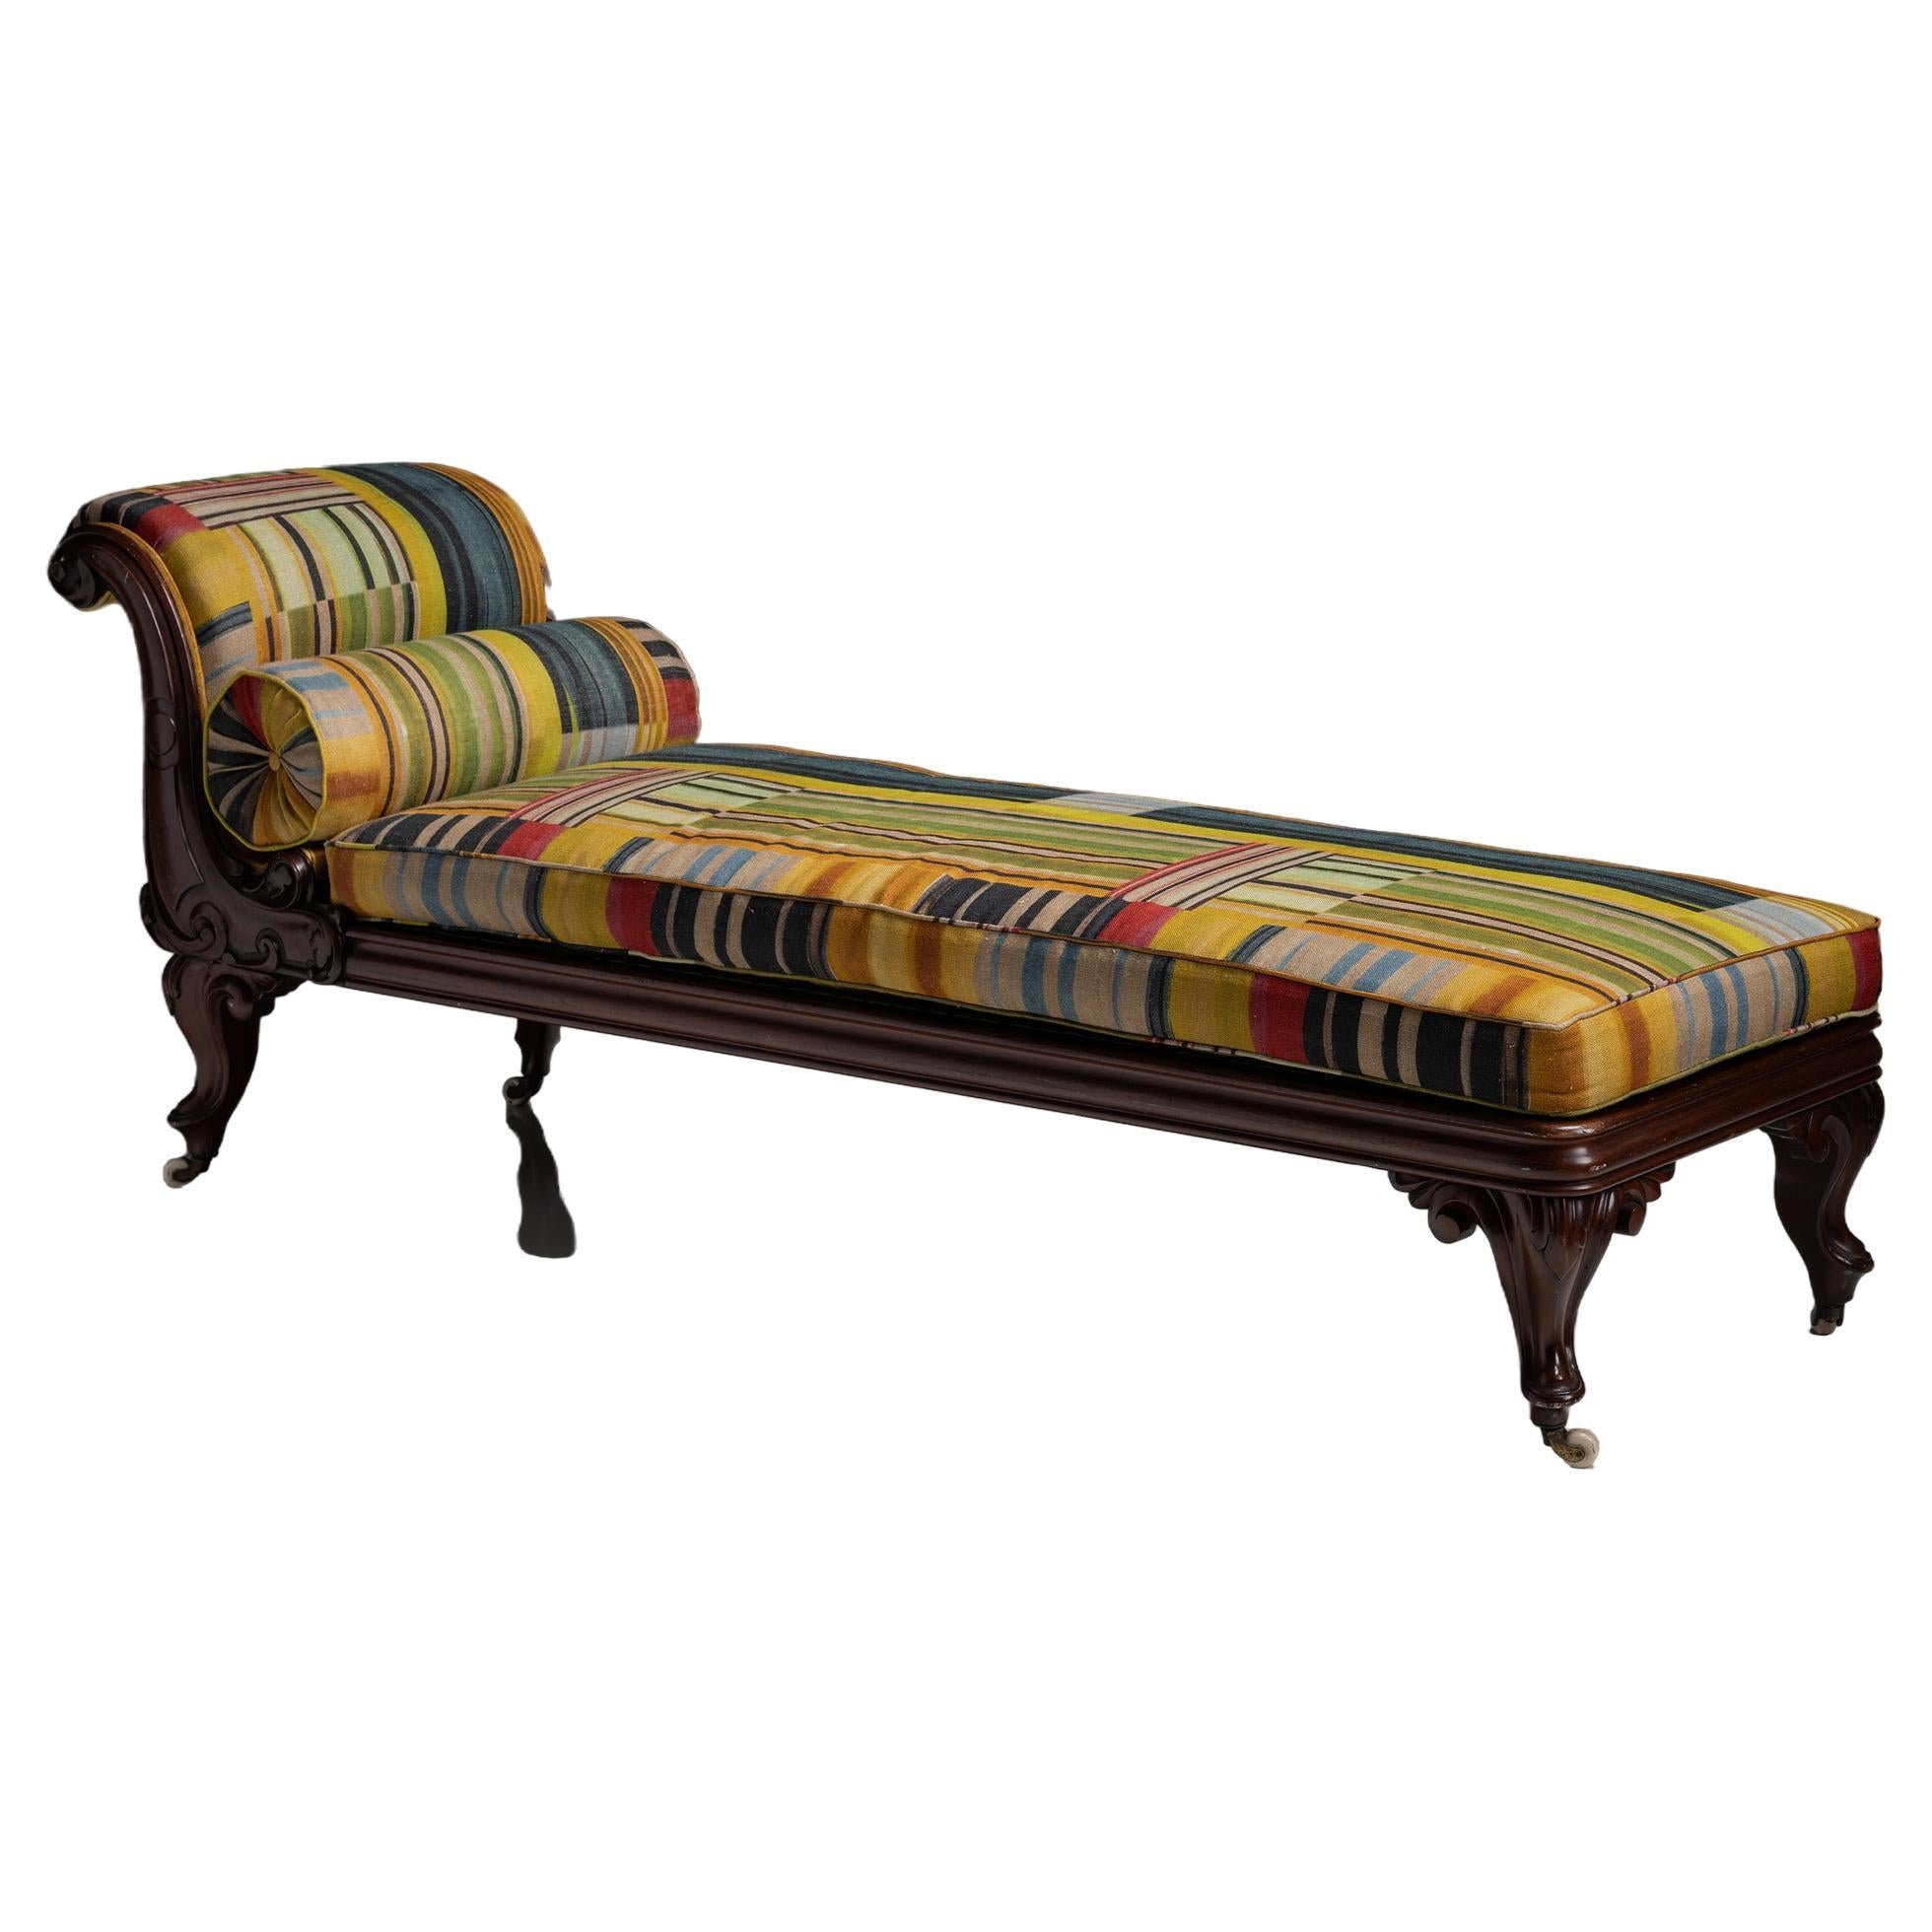 Daybed in Striped Linen by Pierre Frey, England circa 1870